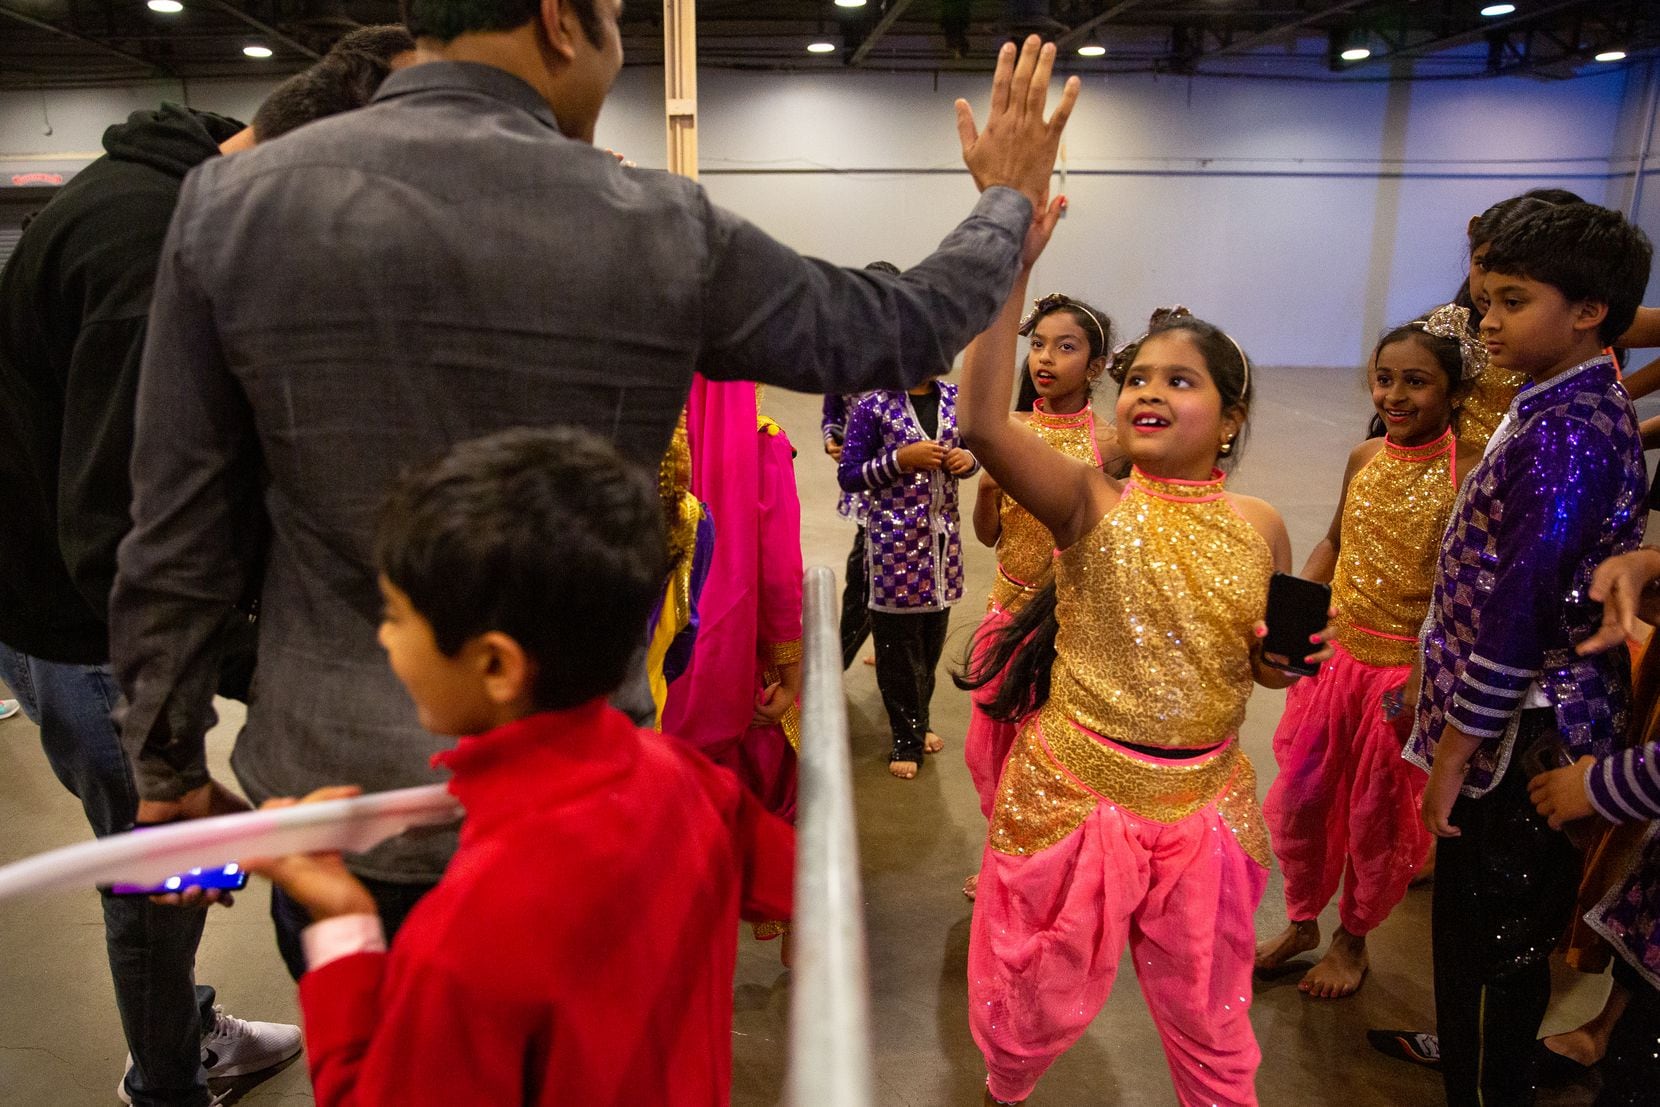 Balayashmitha Allada gets a high-five Saturday after performing with her troupe from Nrithya Dance Academy at Fair Park in Dallas.